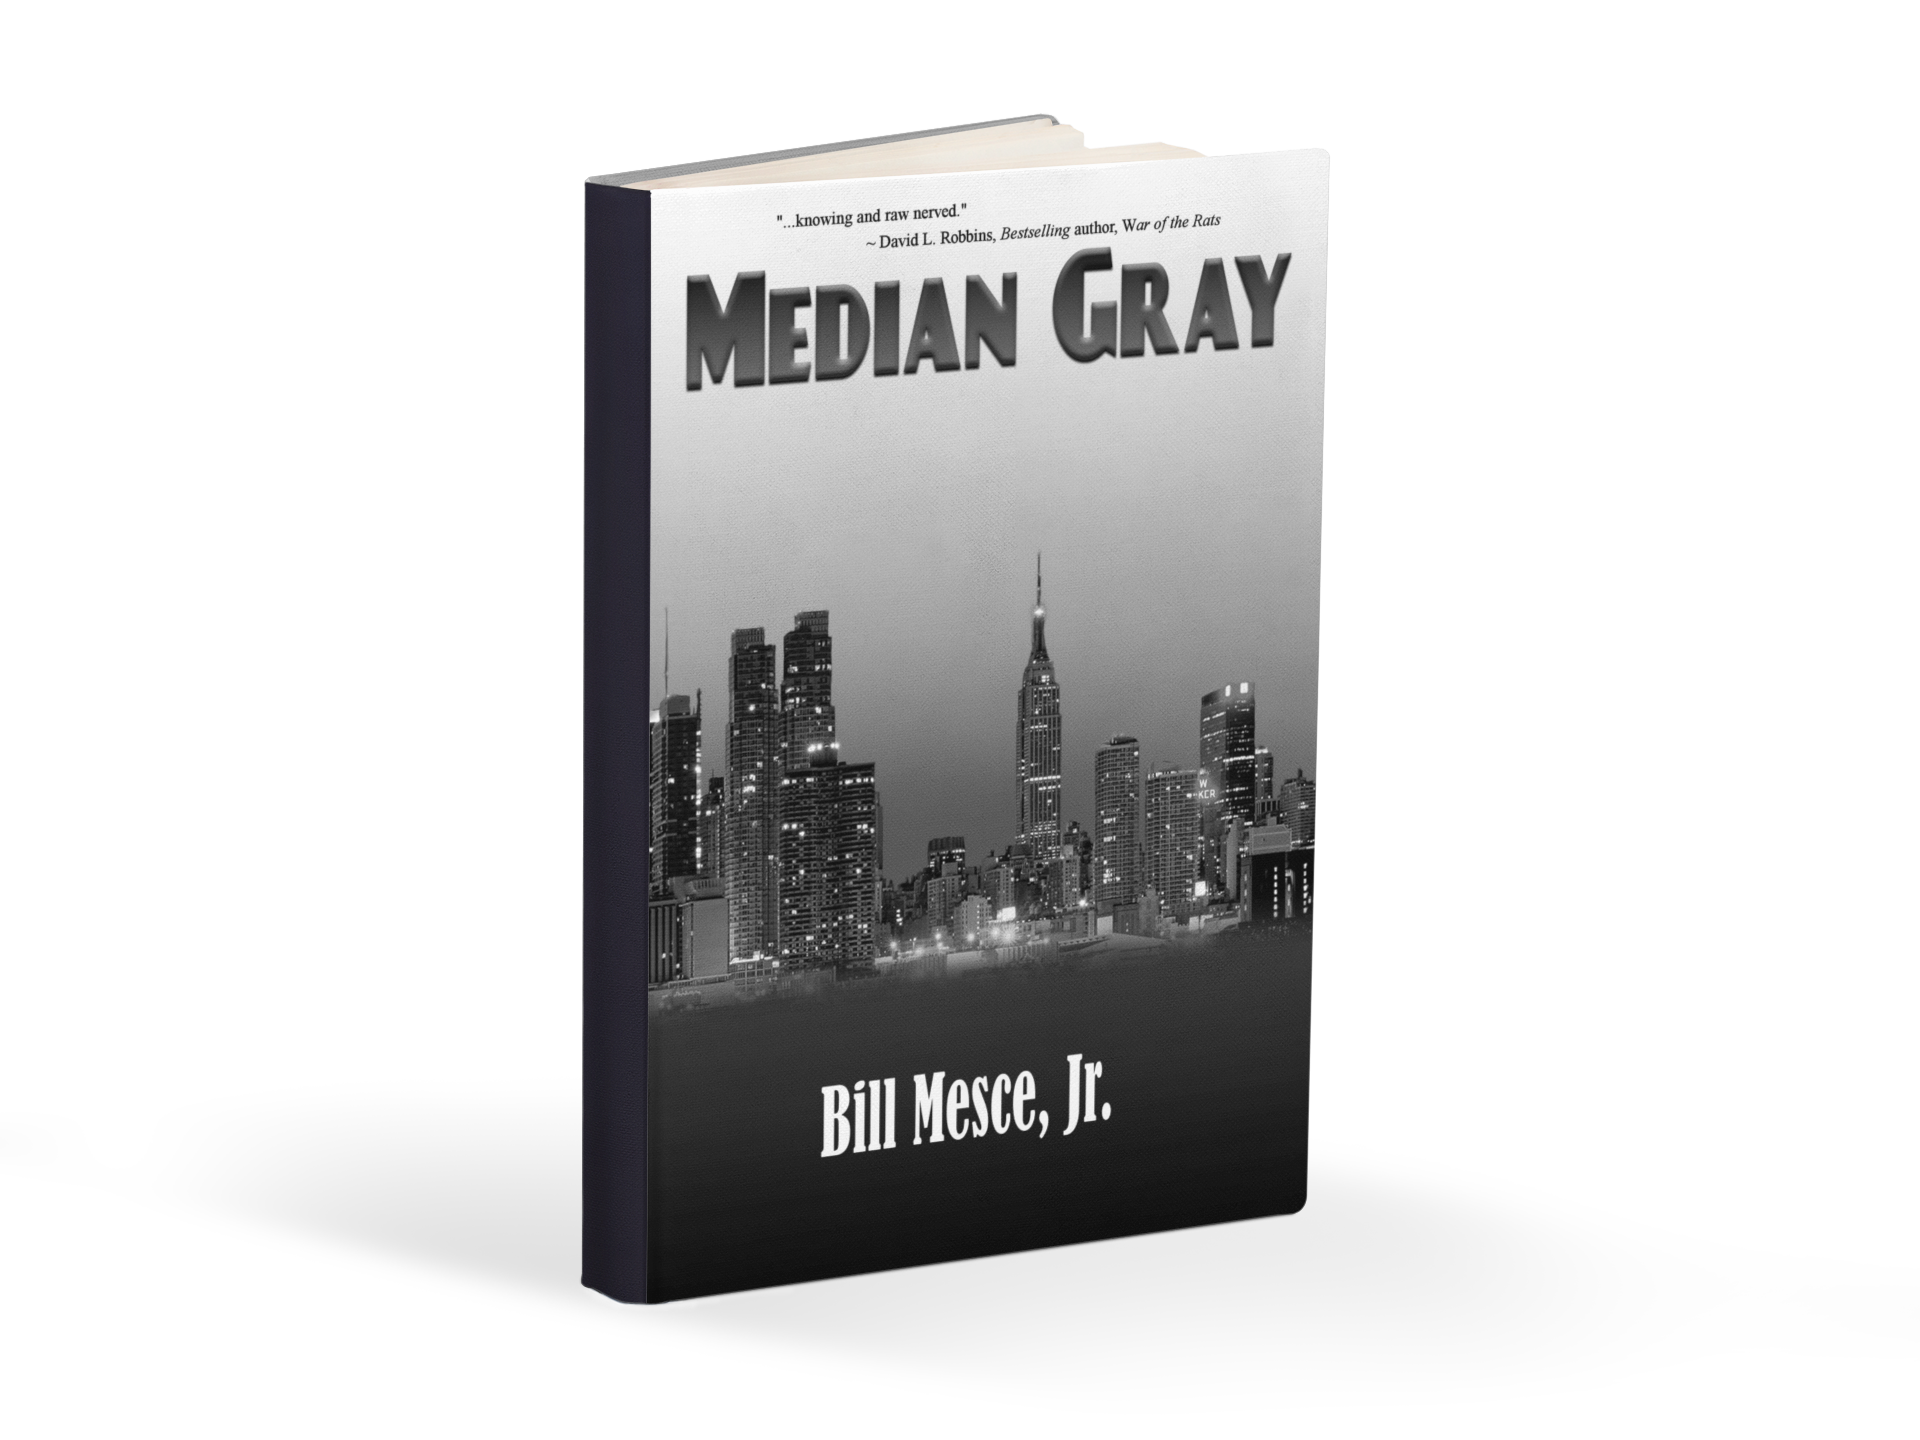 Median Gray by Bill Mesce, Jr. is a Hard Hitting Police Drama Exploring the Moral Ambiguities Between Law and Justice